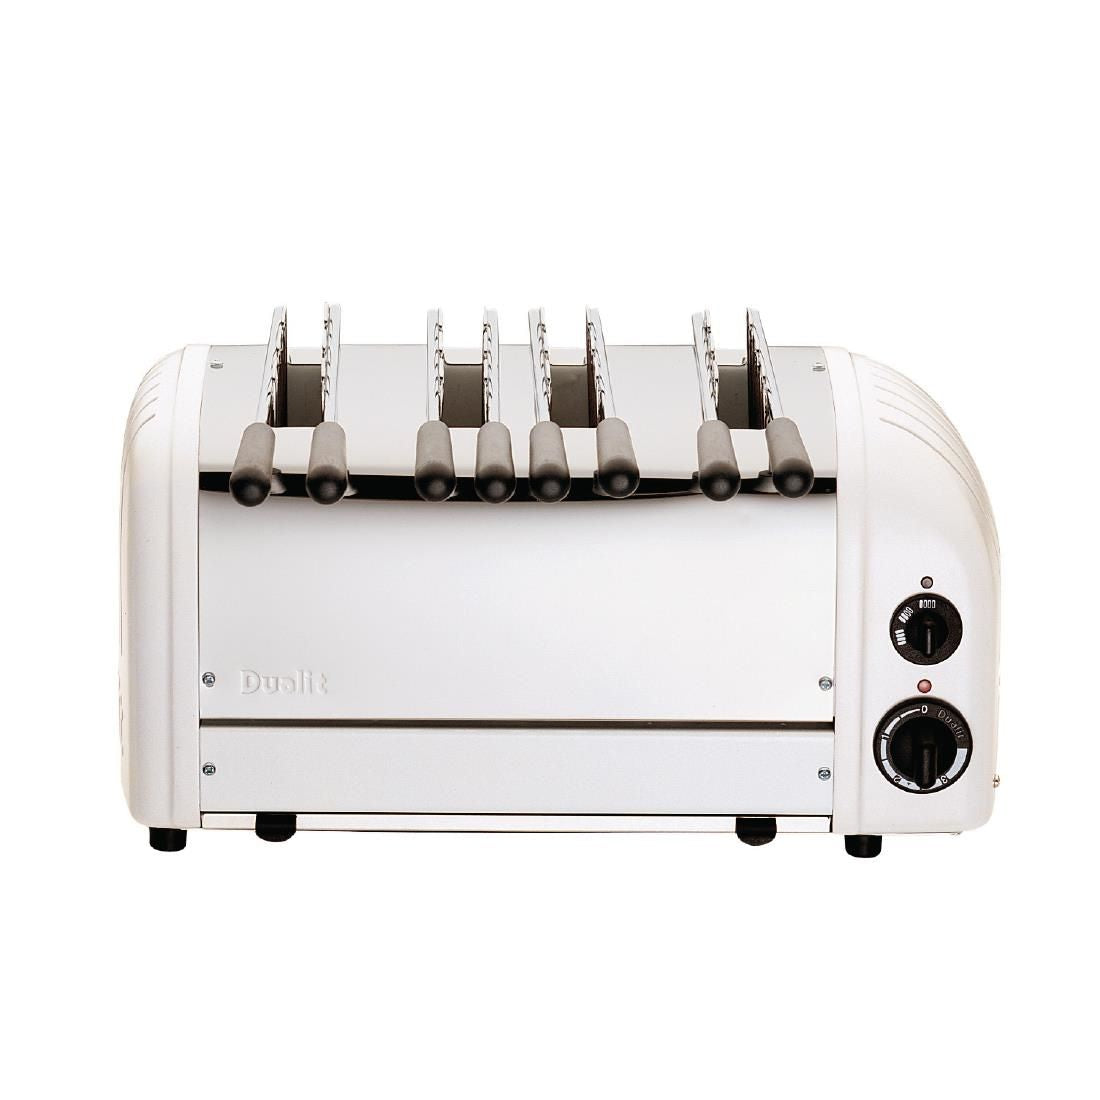 Dualit 4 Slice Sandwich Toaster White 41034 JD Catering Equipment Solutions Ltd